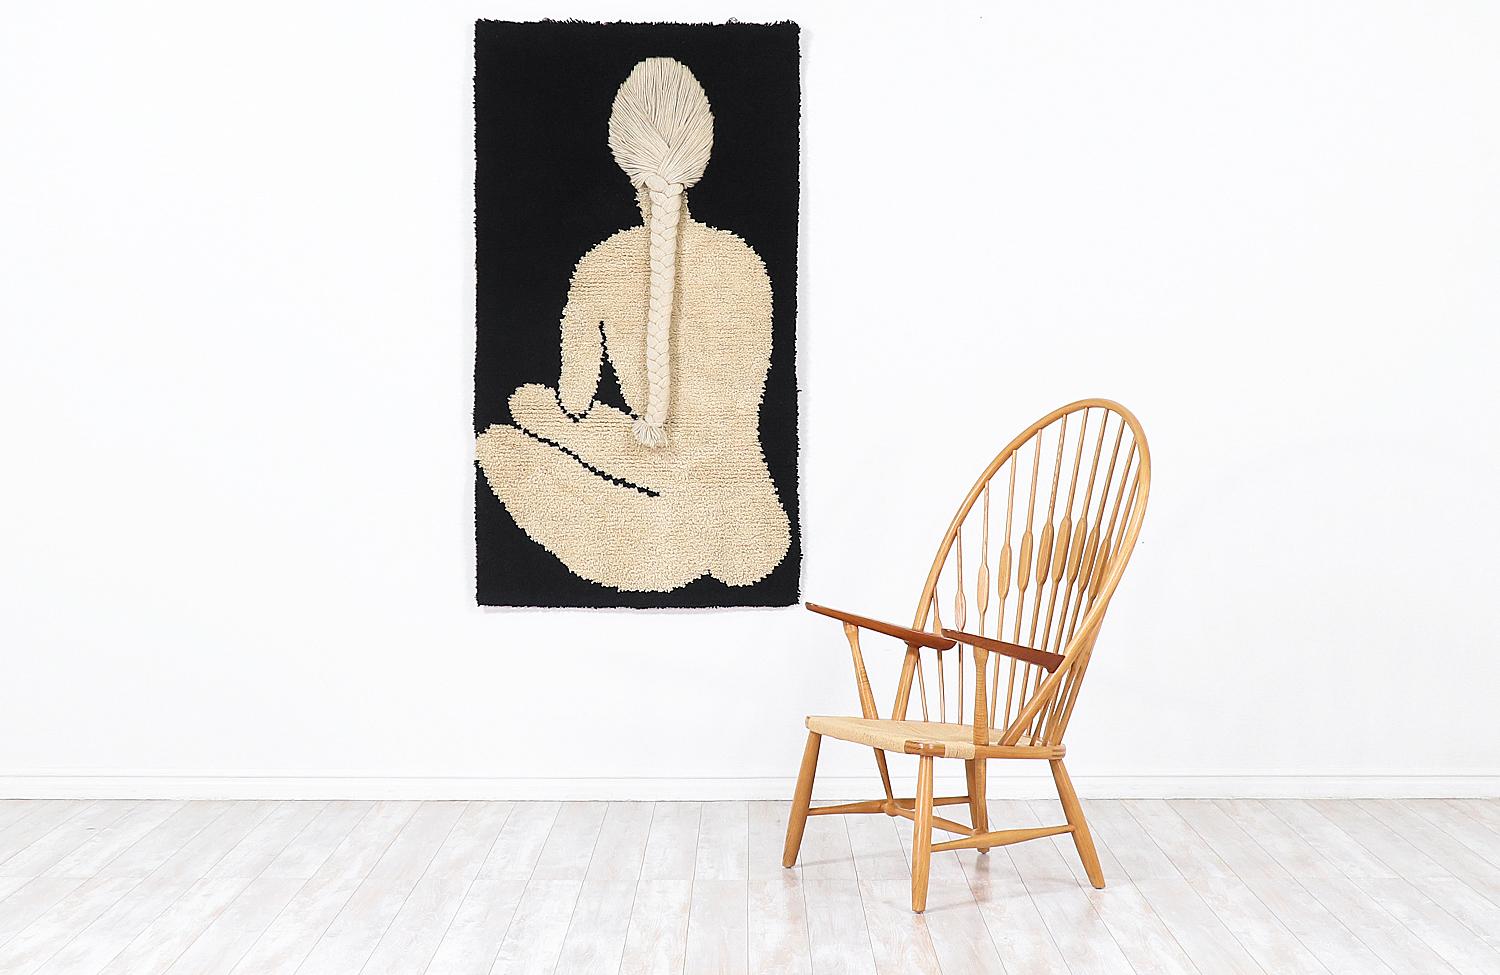 Large Danish modern hanging pop art rug designed and manufactured by Rya in Denmark, circa 1960s. This gorgeous rug has a unique design with a light creamed wool and a braided woman silhouette framed on a black wool rectangle exhibiting rich